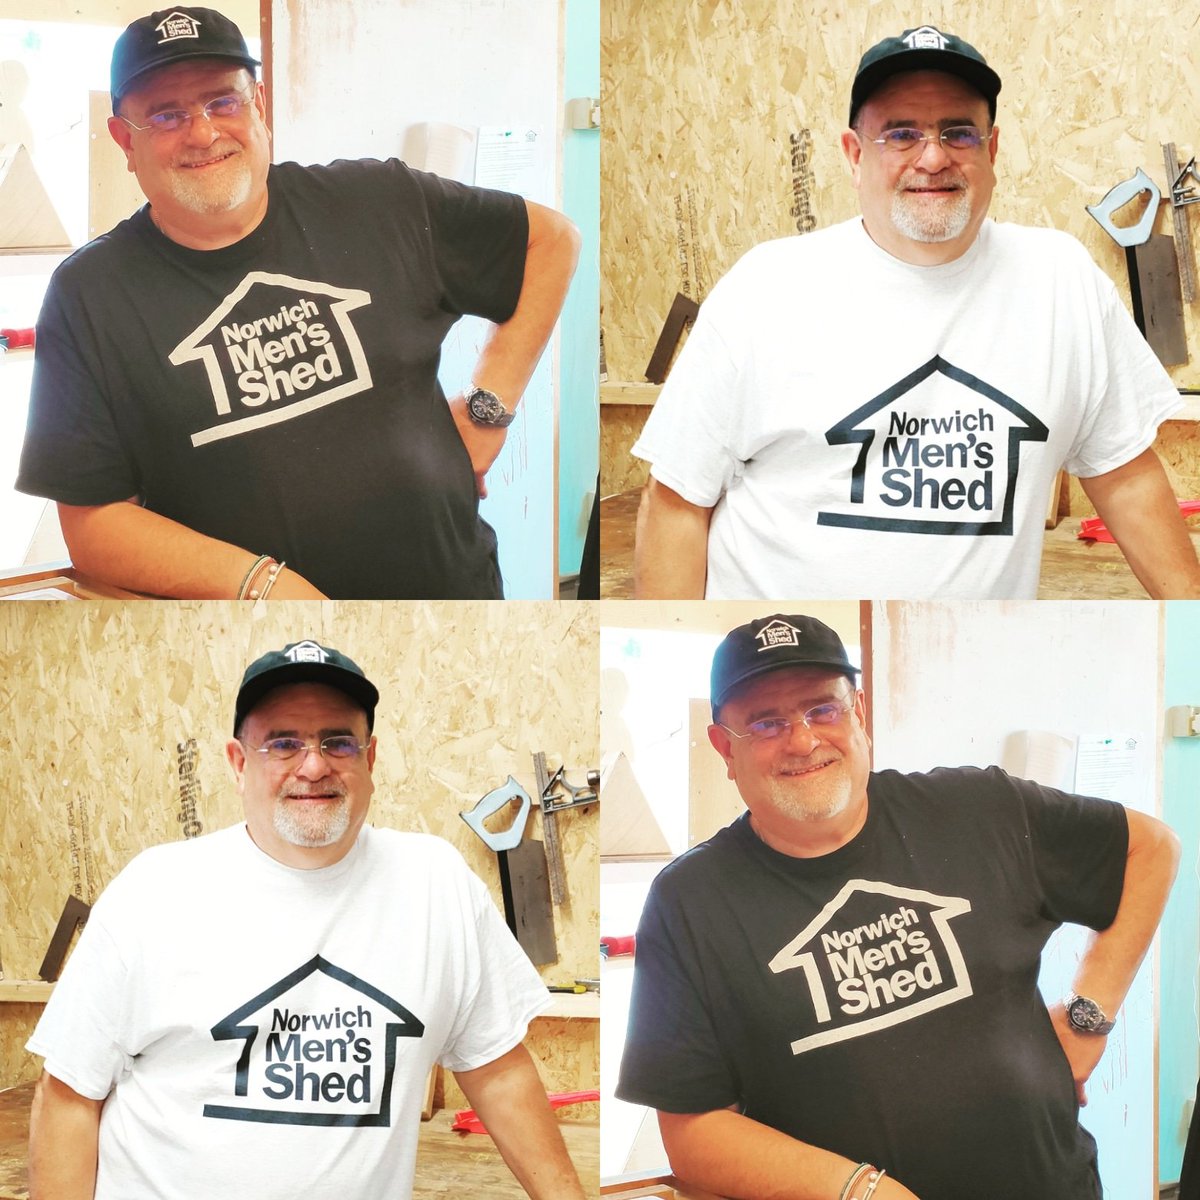 Our supervisor Martino rocking our new merch!

Can highly recommend @Printful for their quality yet affordable print on demand offer

#mensmentalhealth 
#norwichcharity 
#menssheds